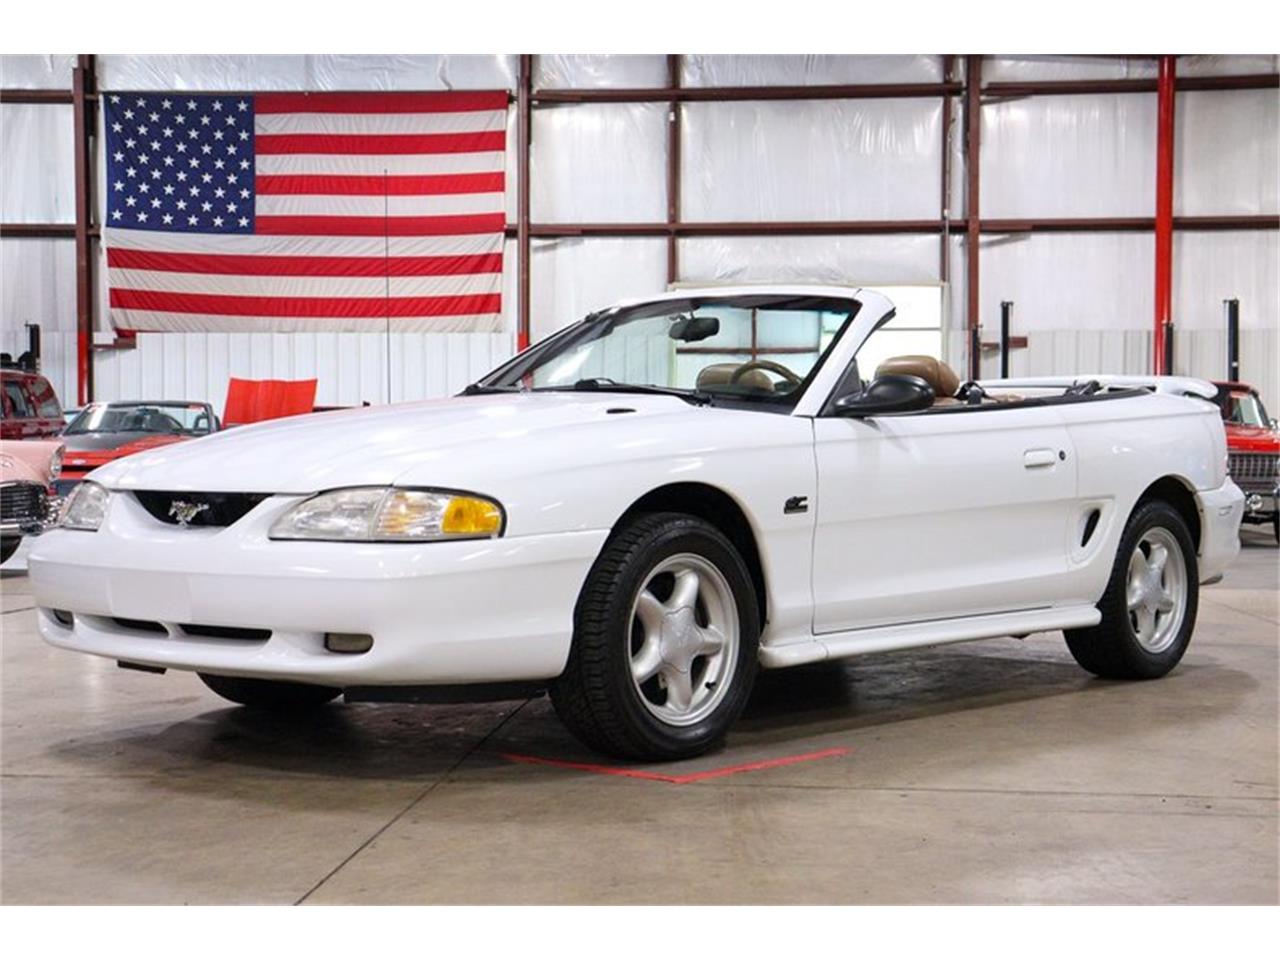 For Sale: 1995 Ford Mustang in Ken2od, Michigan for sale in Grand Rapids, MI